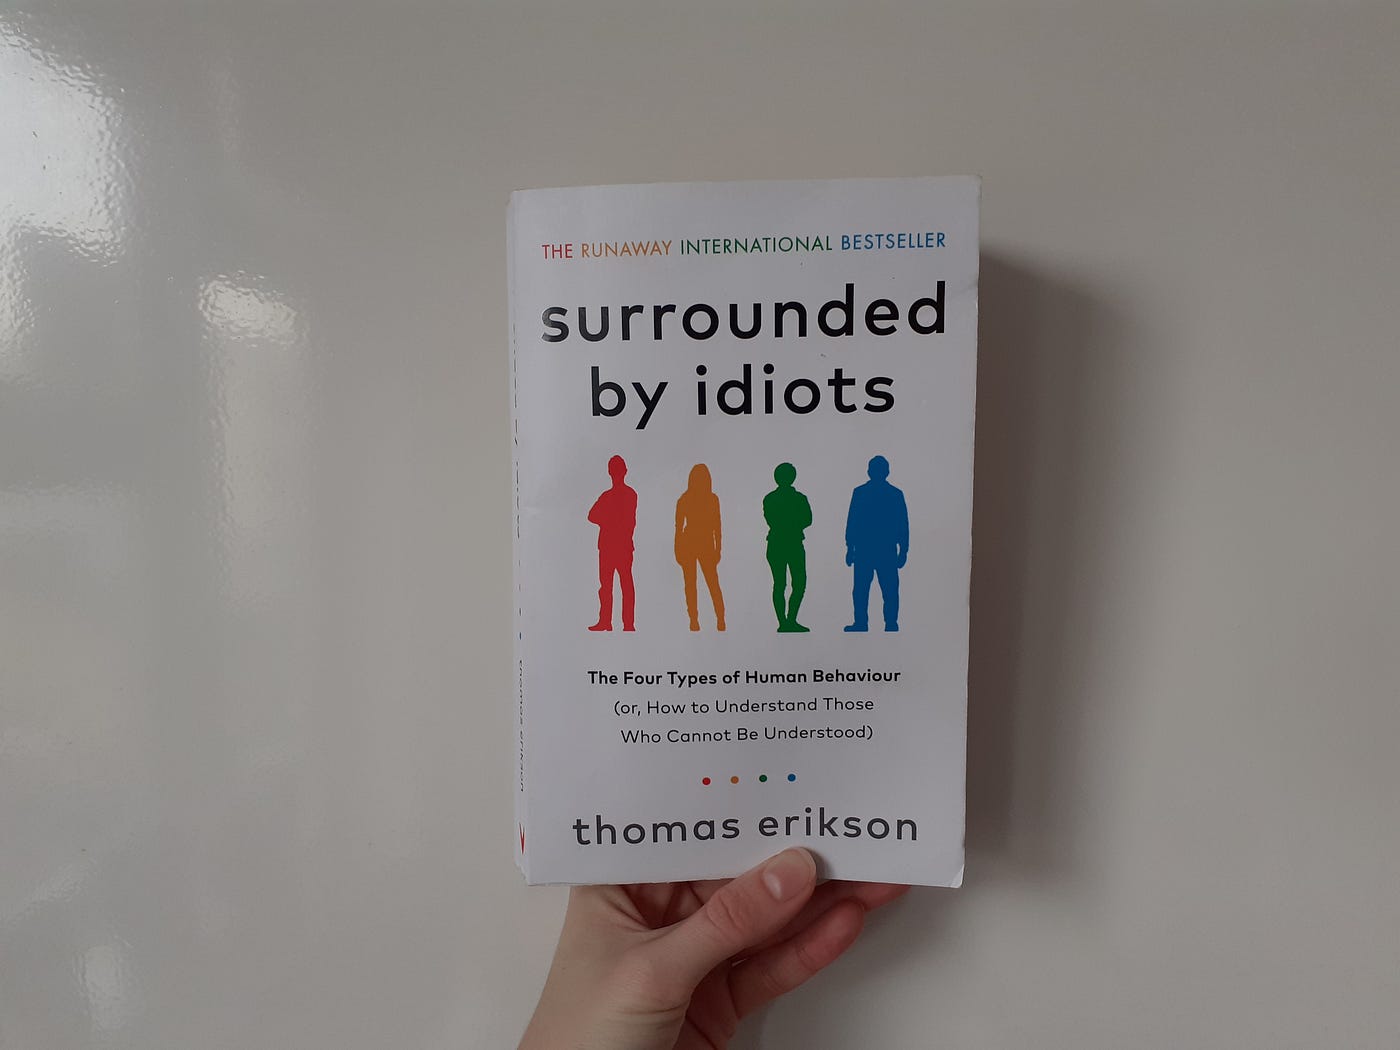 How To Survive a World Full of Idiots, by Pia Barna